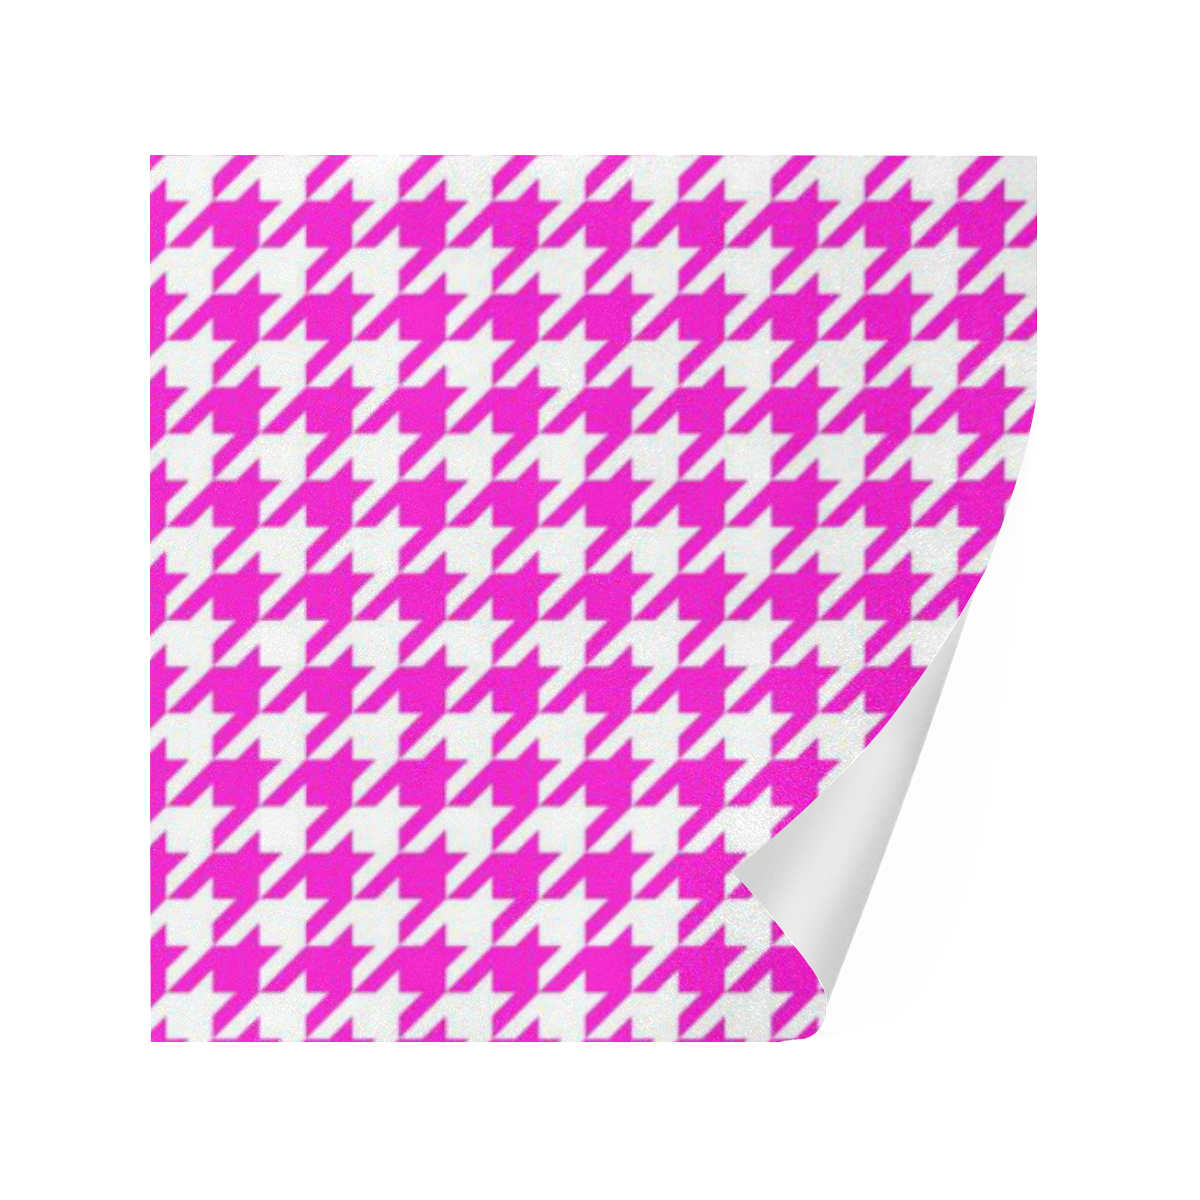 Friendly Houndstooth Pattern,pink by FeelGood Gift Wrapping Paper 58"x 23" (5 Rolls)